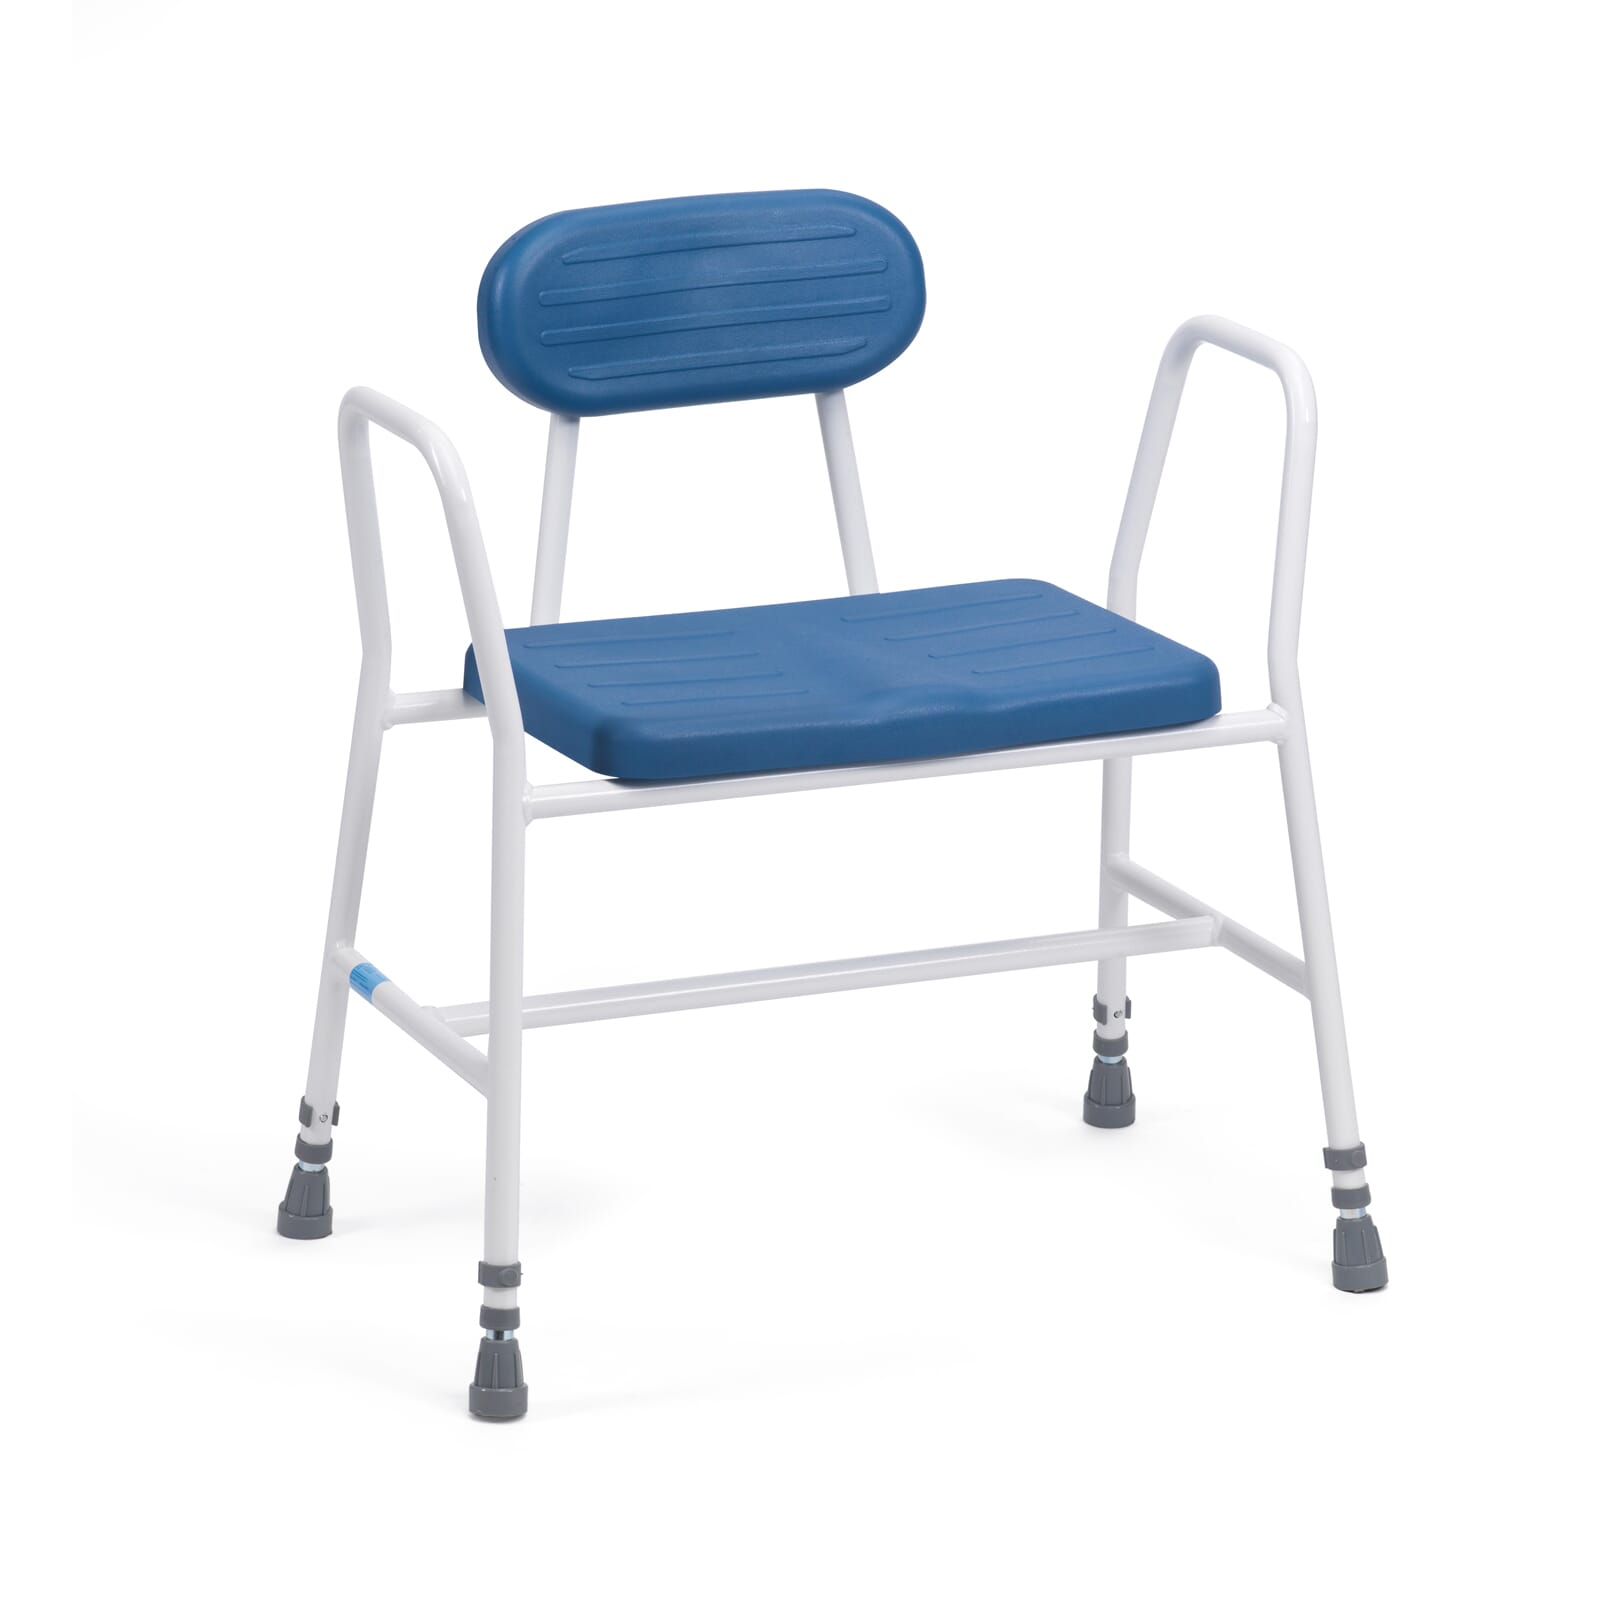 View PU Bariatric Perching Kitchen Stool Angled Seat Tubular Arms and Padded Back information